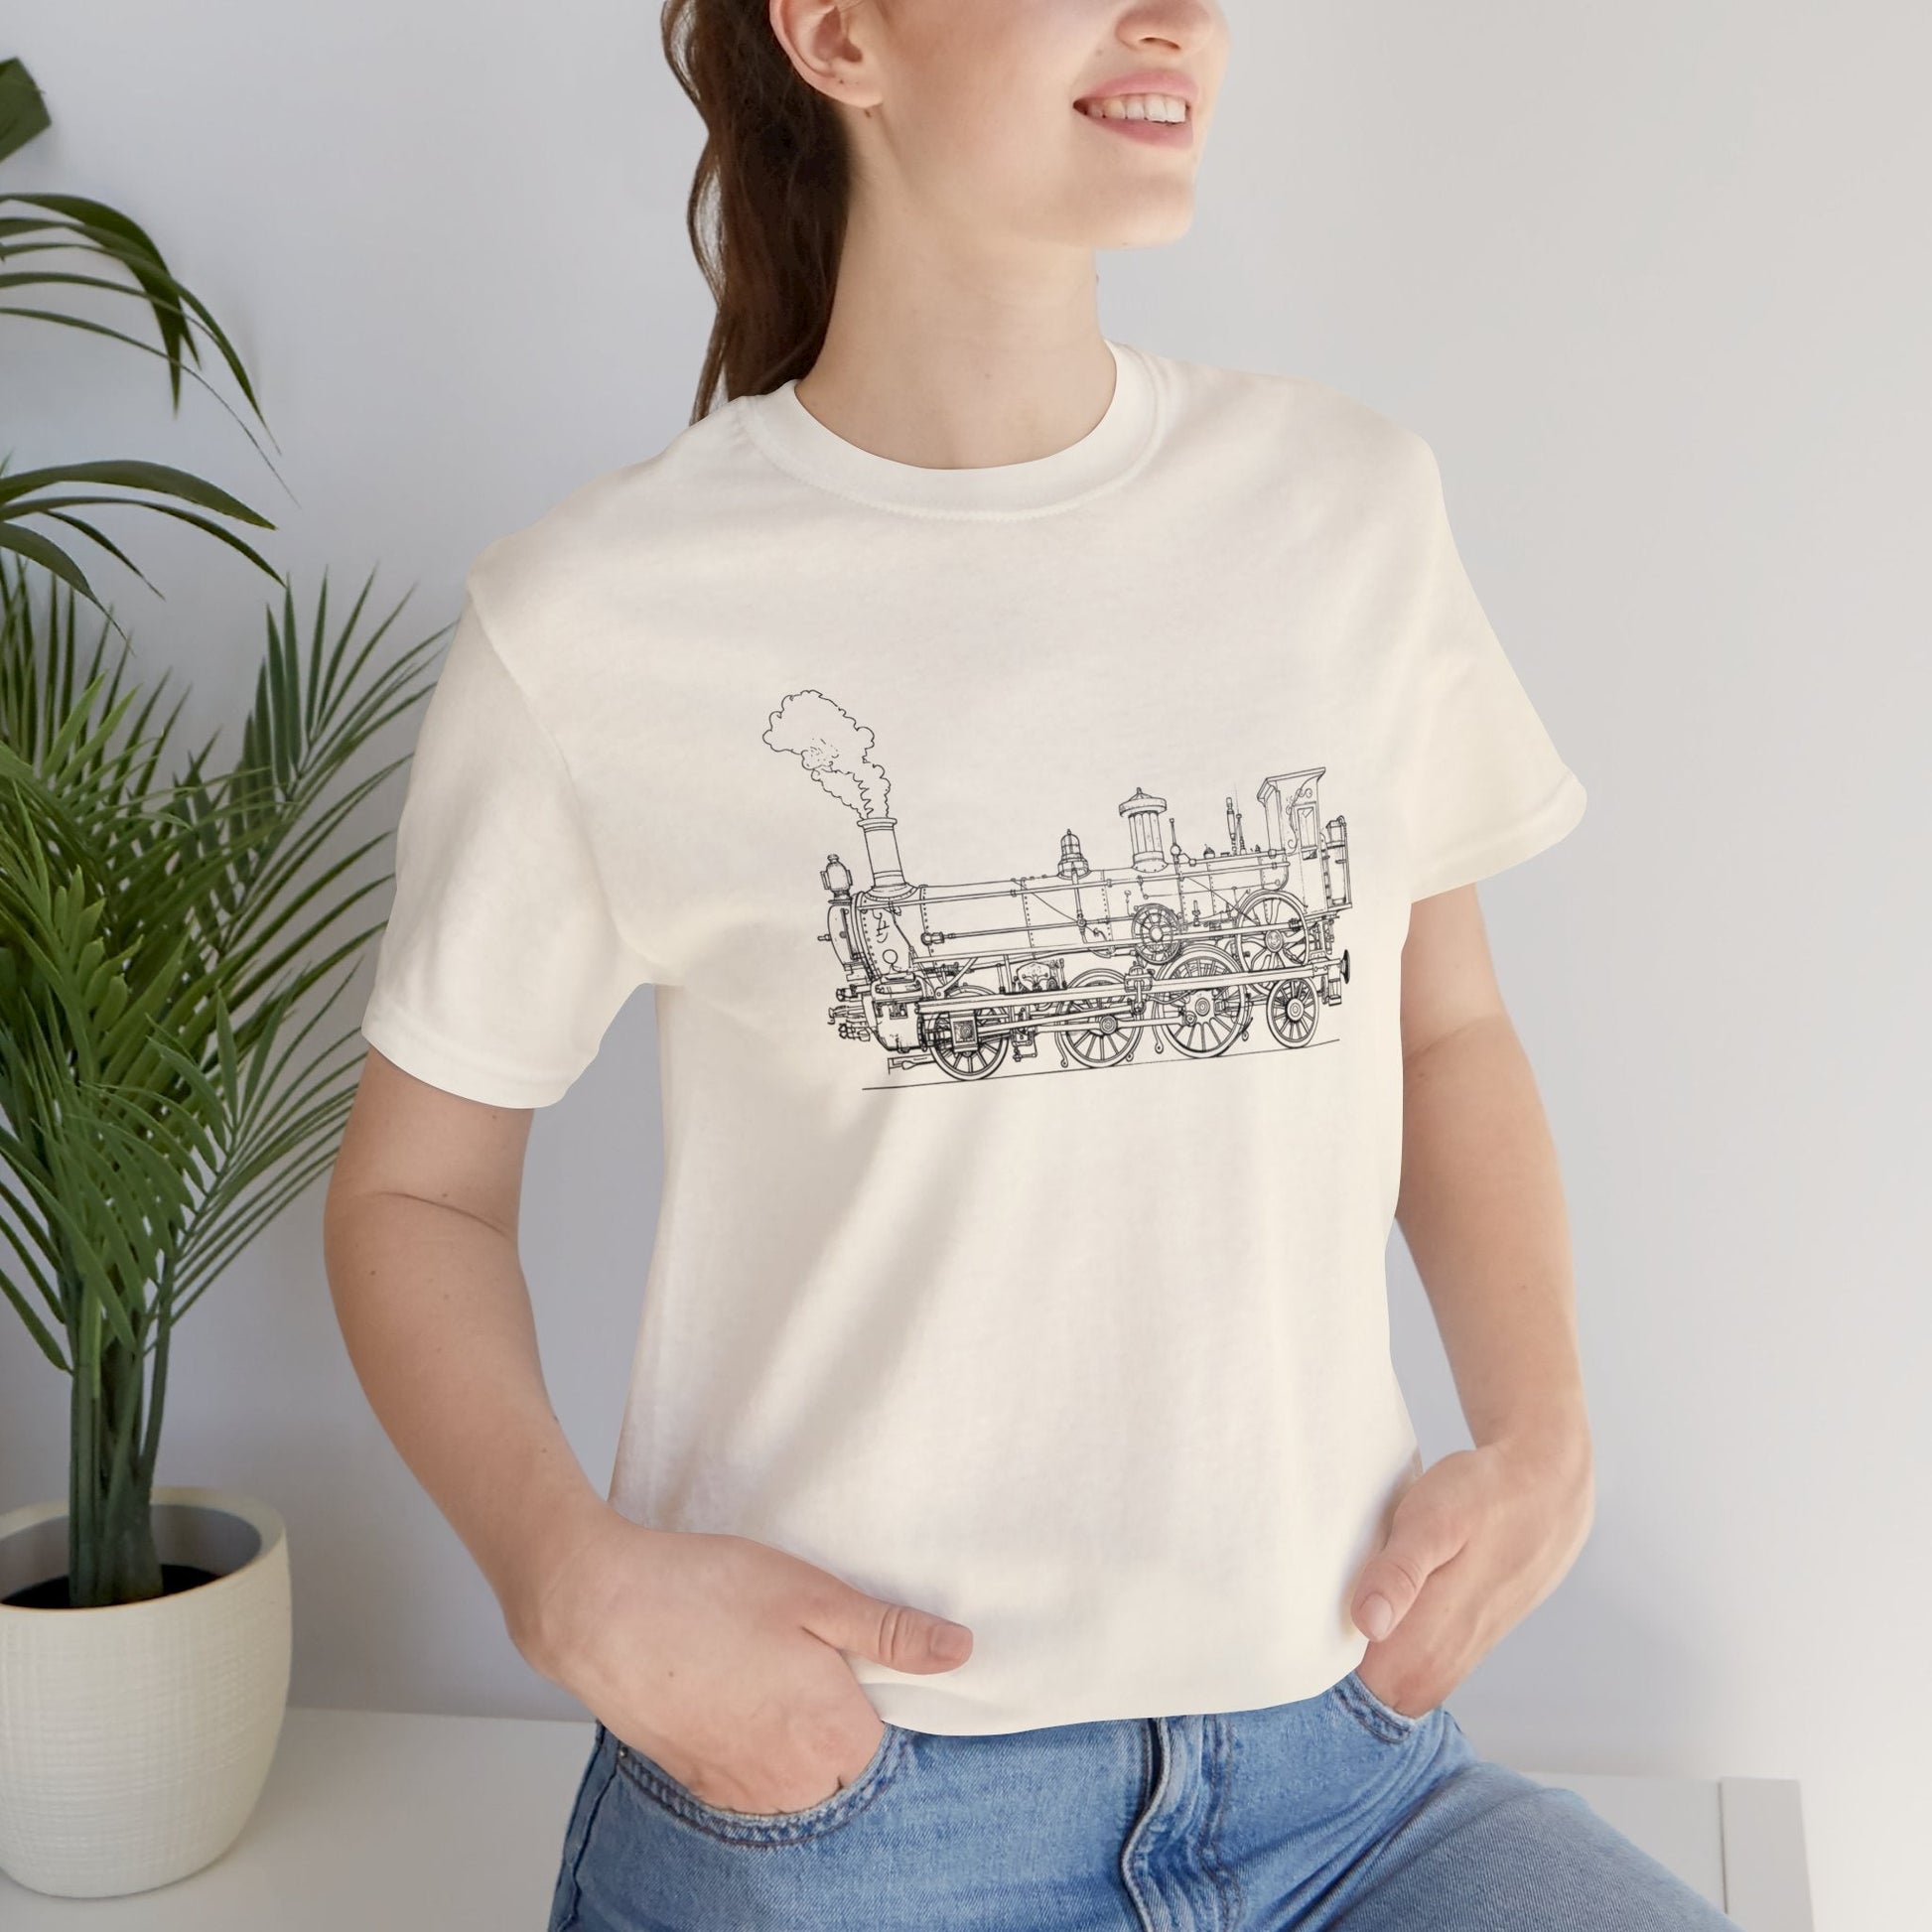 Vintage Steam Engine, Line Drawing of a Steam Engine, Classic Train T-shirt Gift for the Train Lover, High Detail Pen Drawing Full detail - FlooredByArt